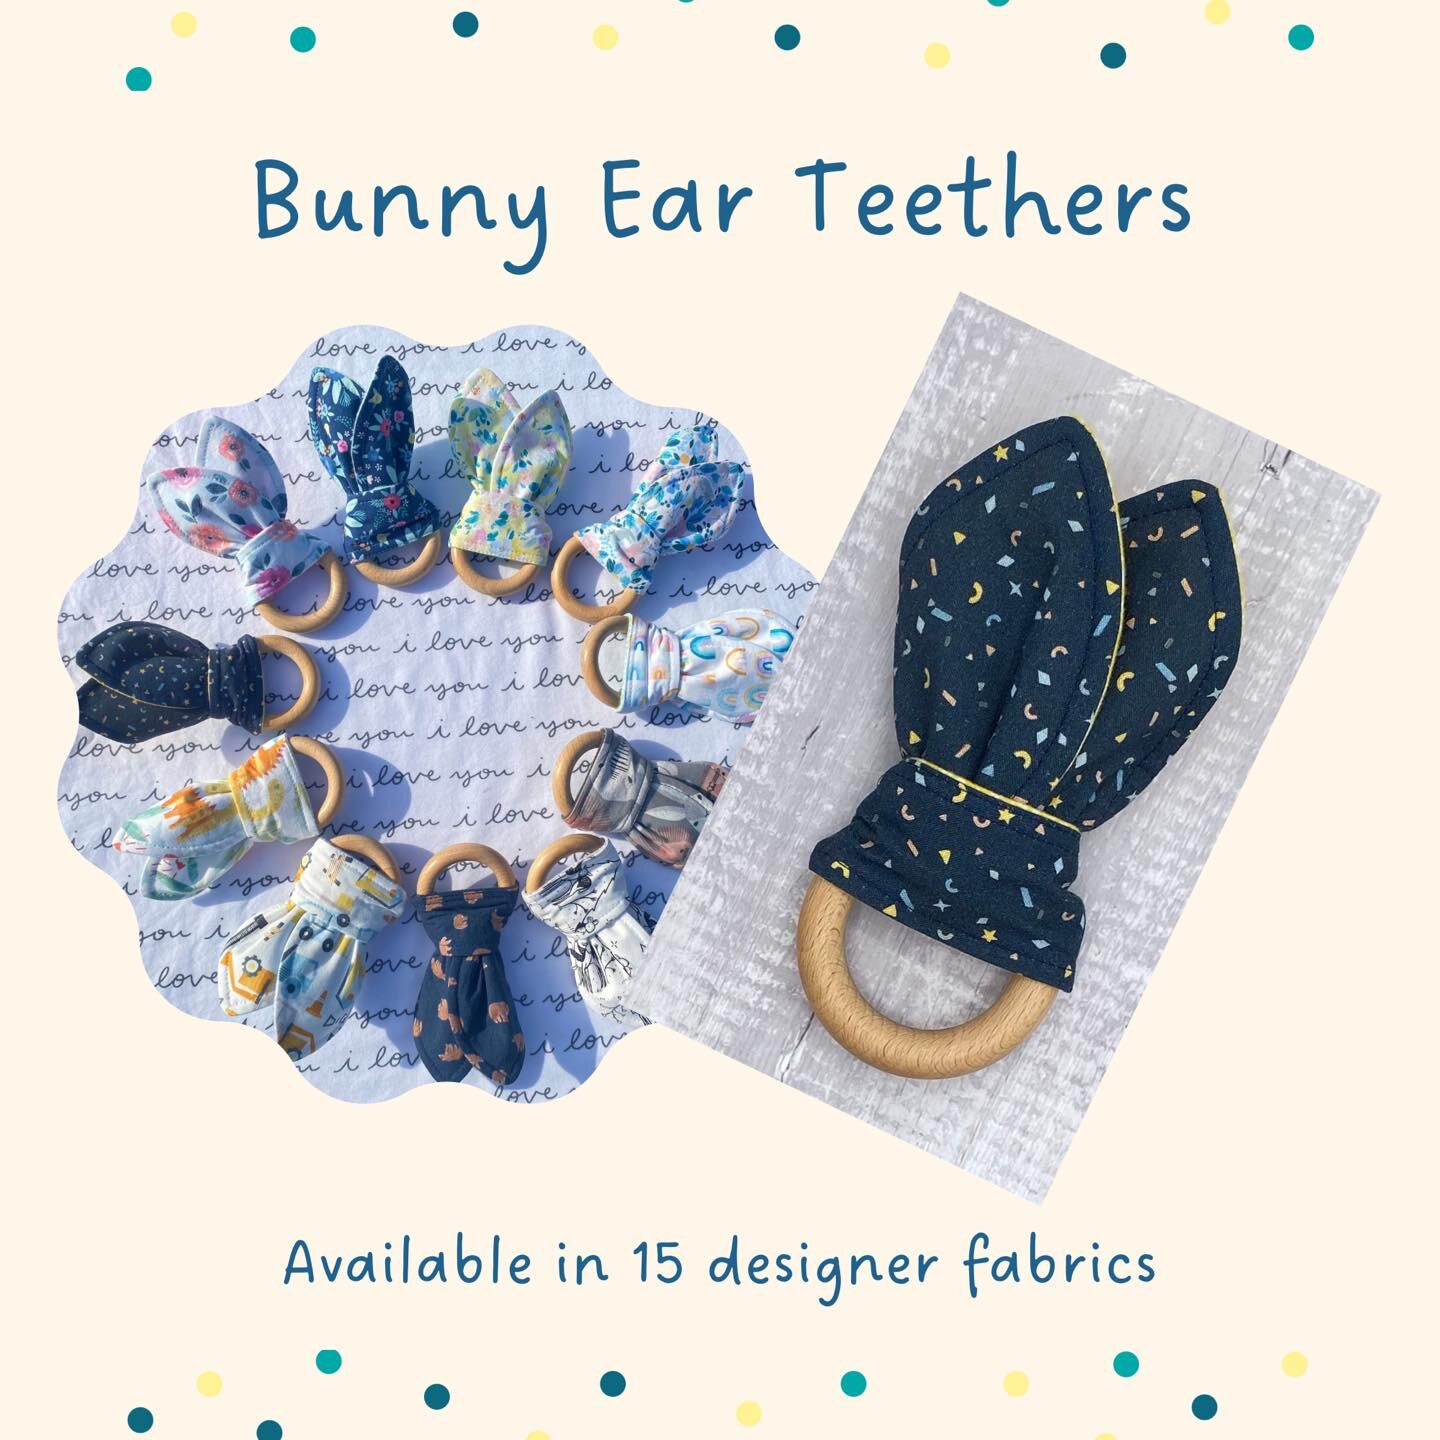 Our bunny ear teethers are made with cotton fabric on one side (check out all of the cute prints on the last slide!) and absorbent flannel on the backside 

The &lsquo;ears&rsquo; are removable and can be machine washed and dried &mdash;- the flannel